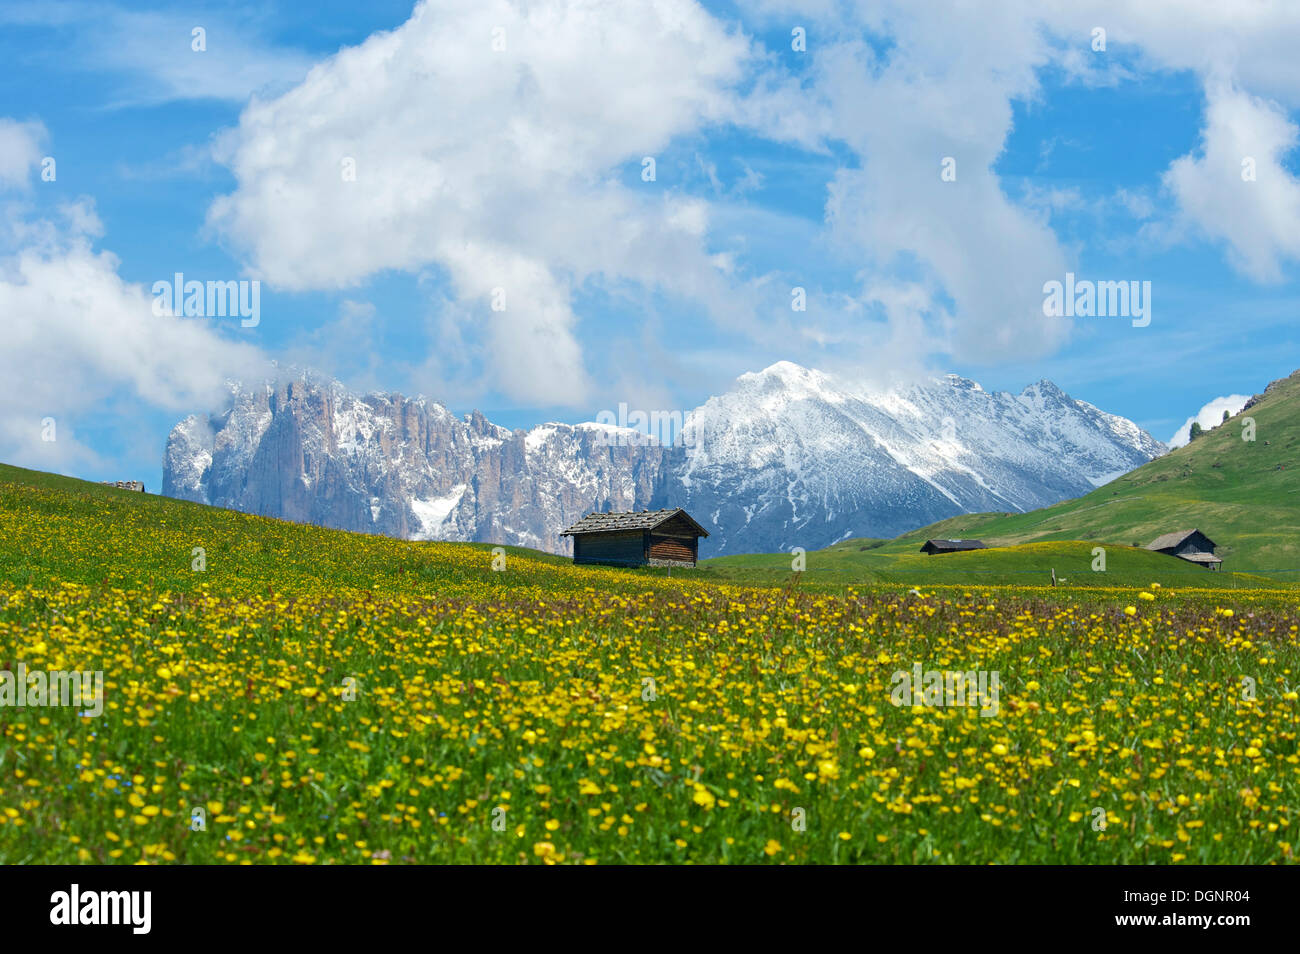 Alpine huts in front of Piatto Mountain and Sasso Lungo Mountains, Seiser Alm, Dolomiten, South Tyrol province Stock Photo